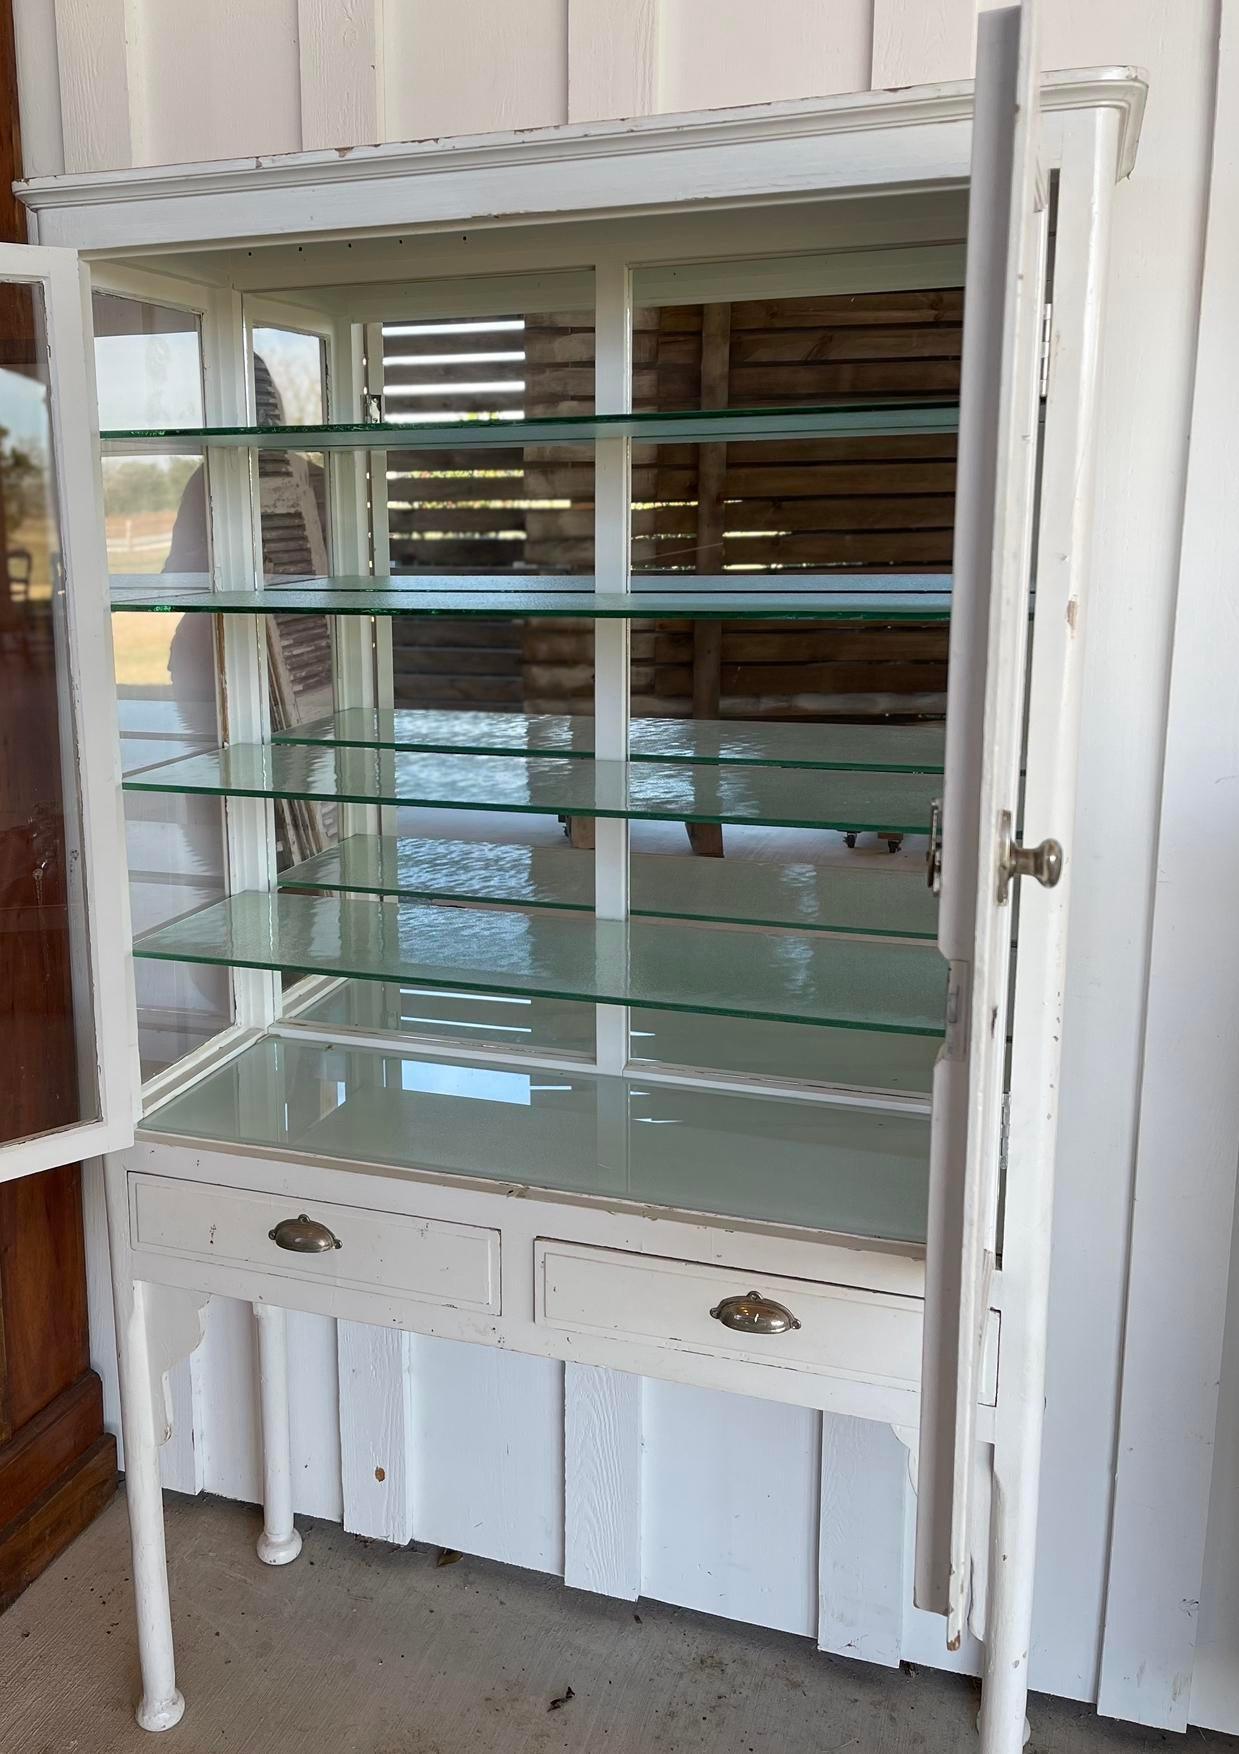 1940’s Medical Storage Cabinet With Original Glass - The White Barn Antiques